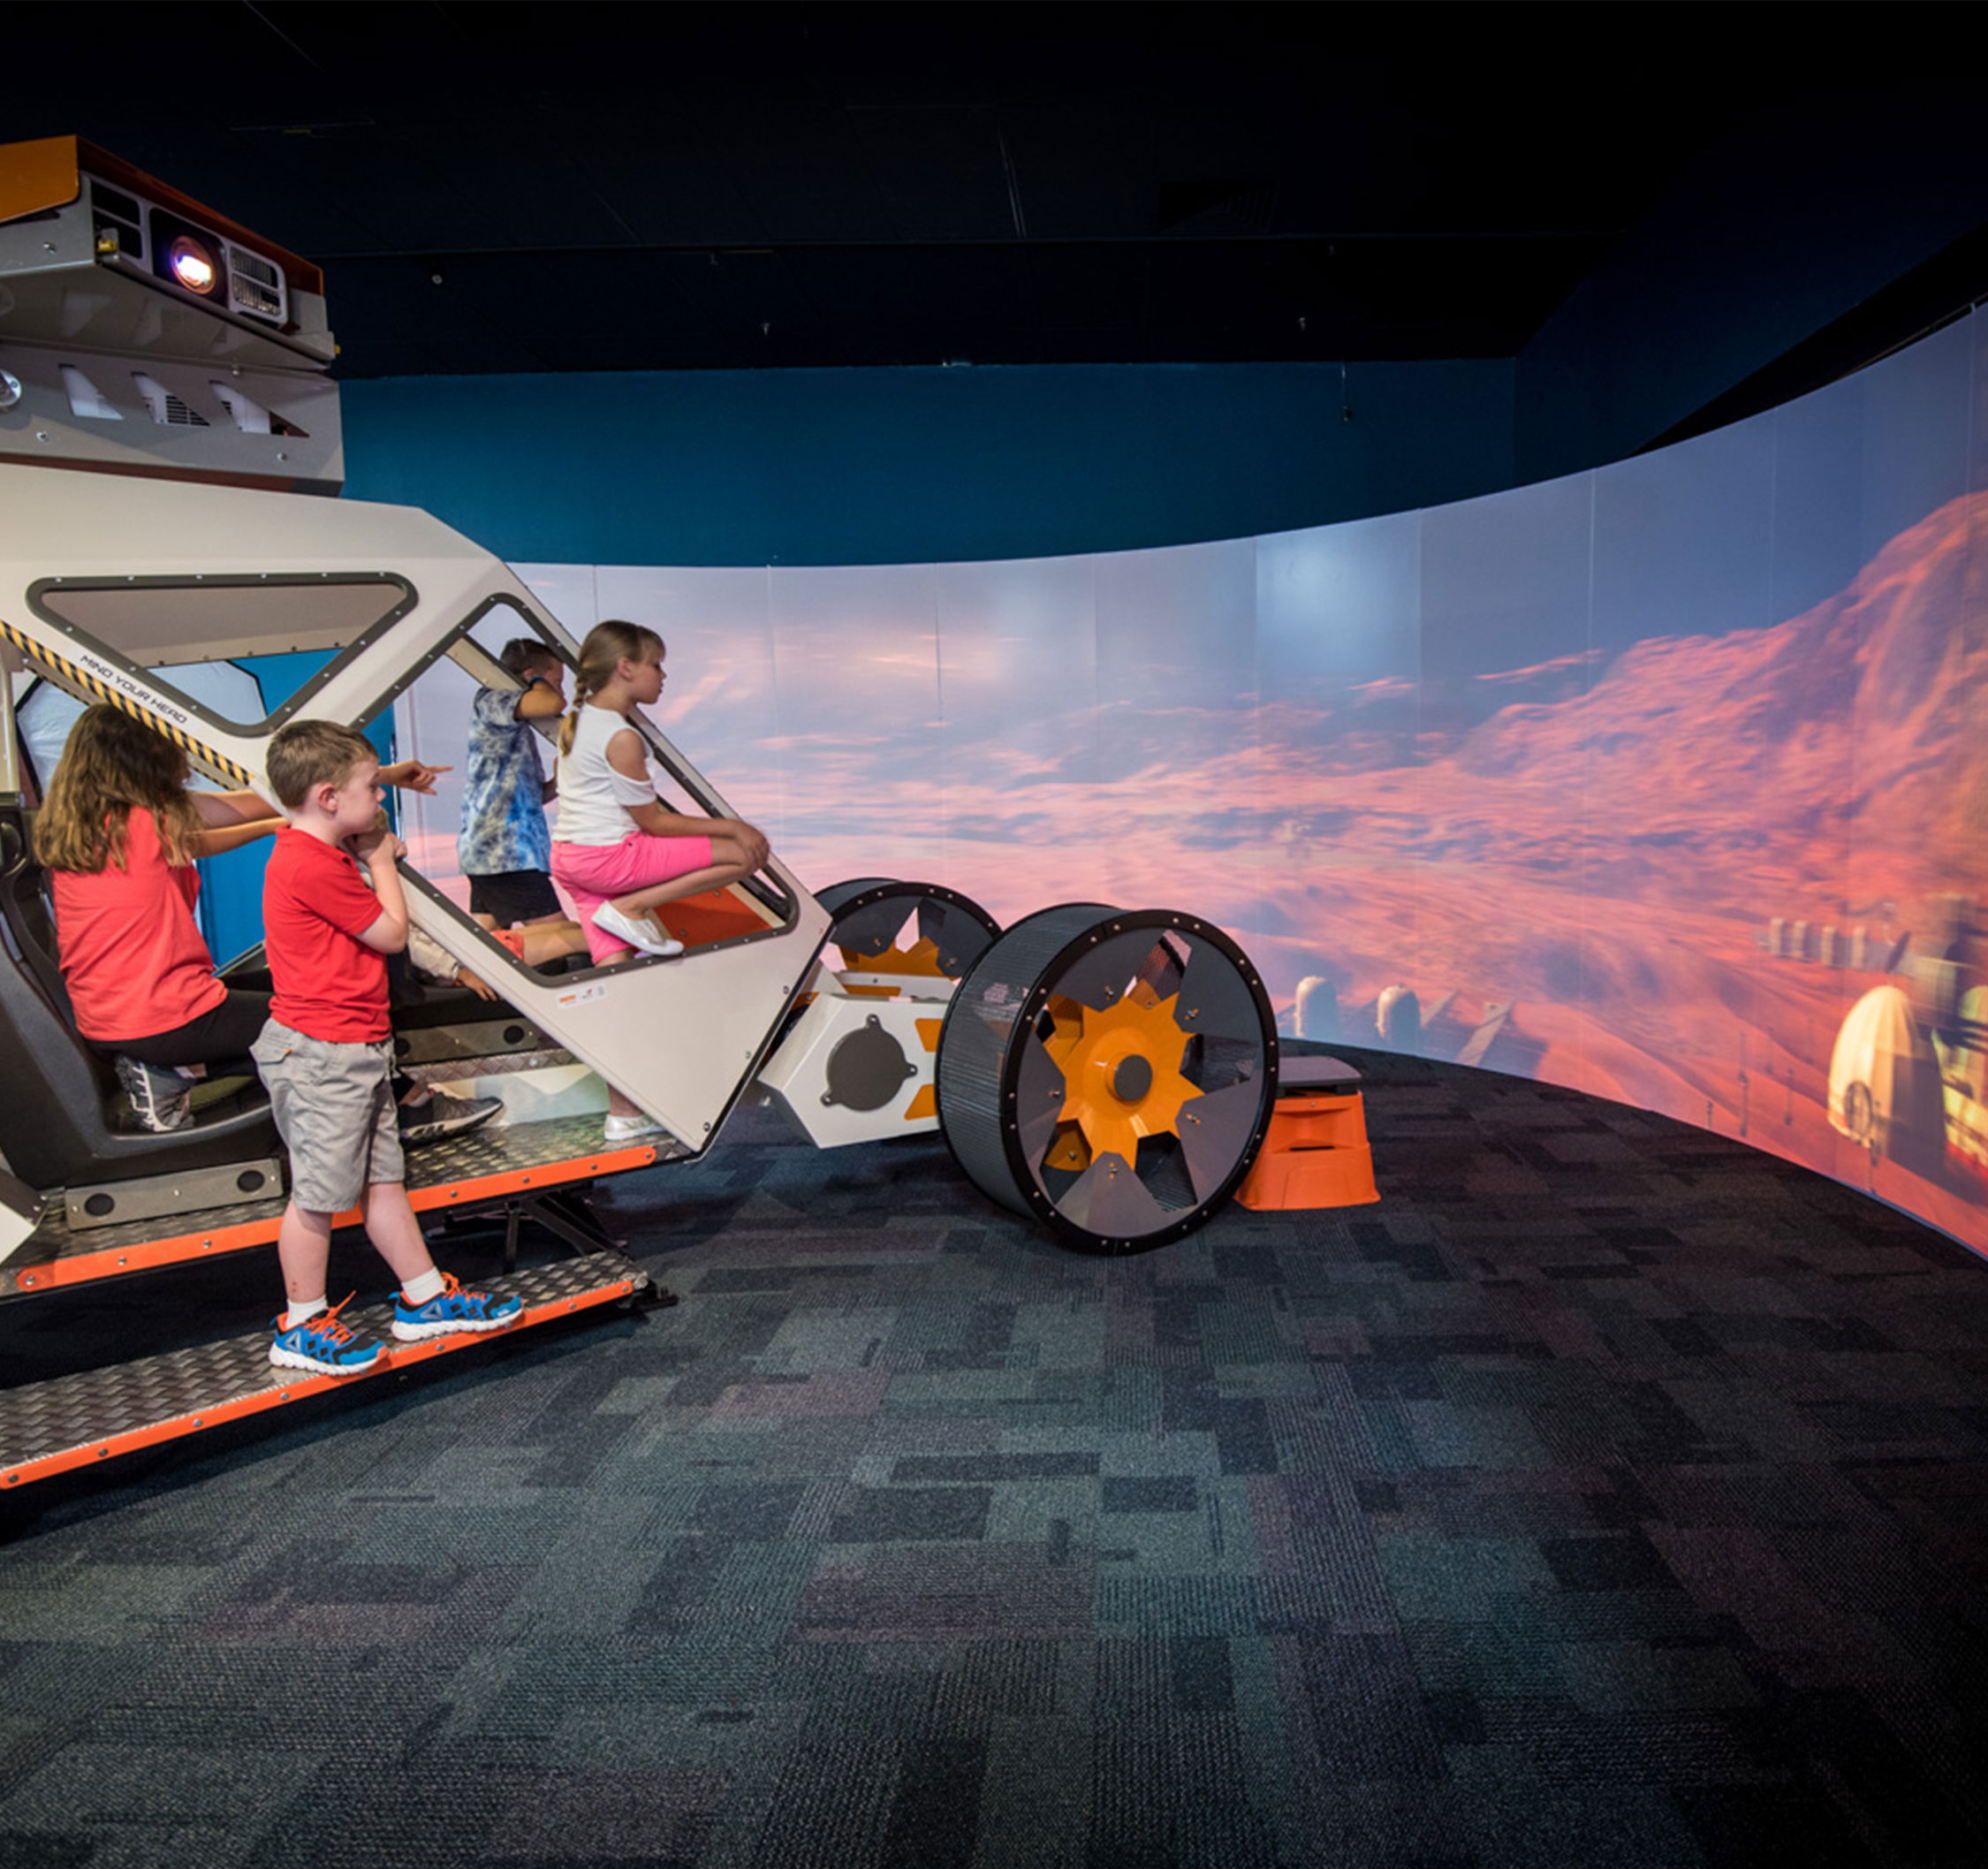 Kids sitting on a Mars Rover replica in front of a Mars-scape